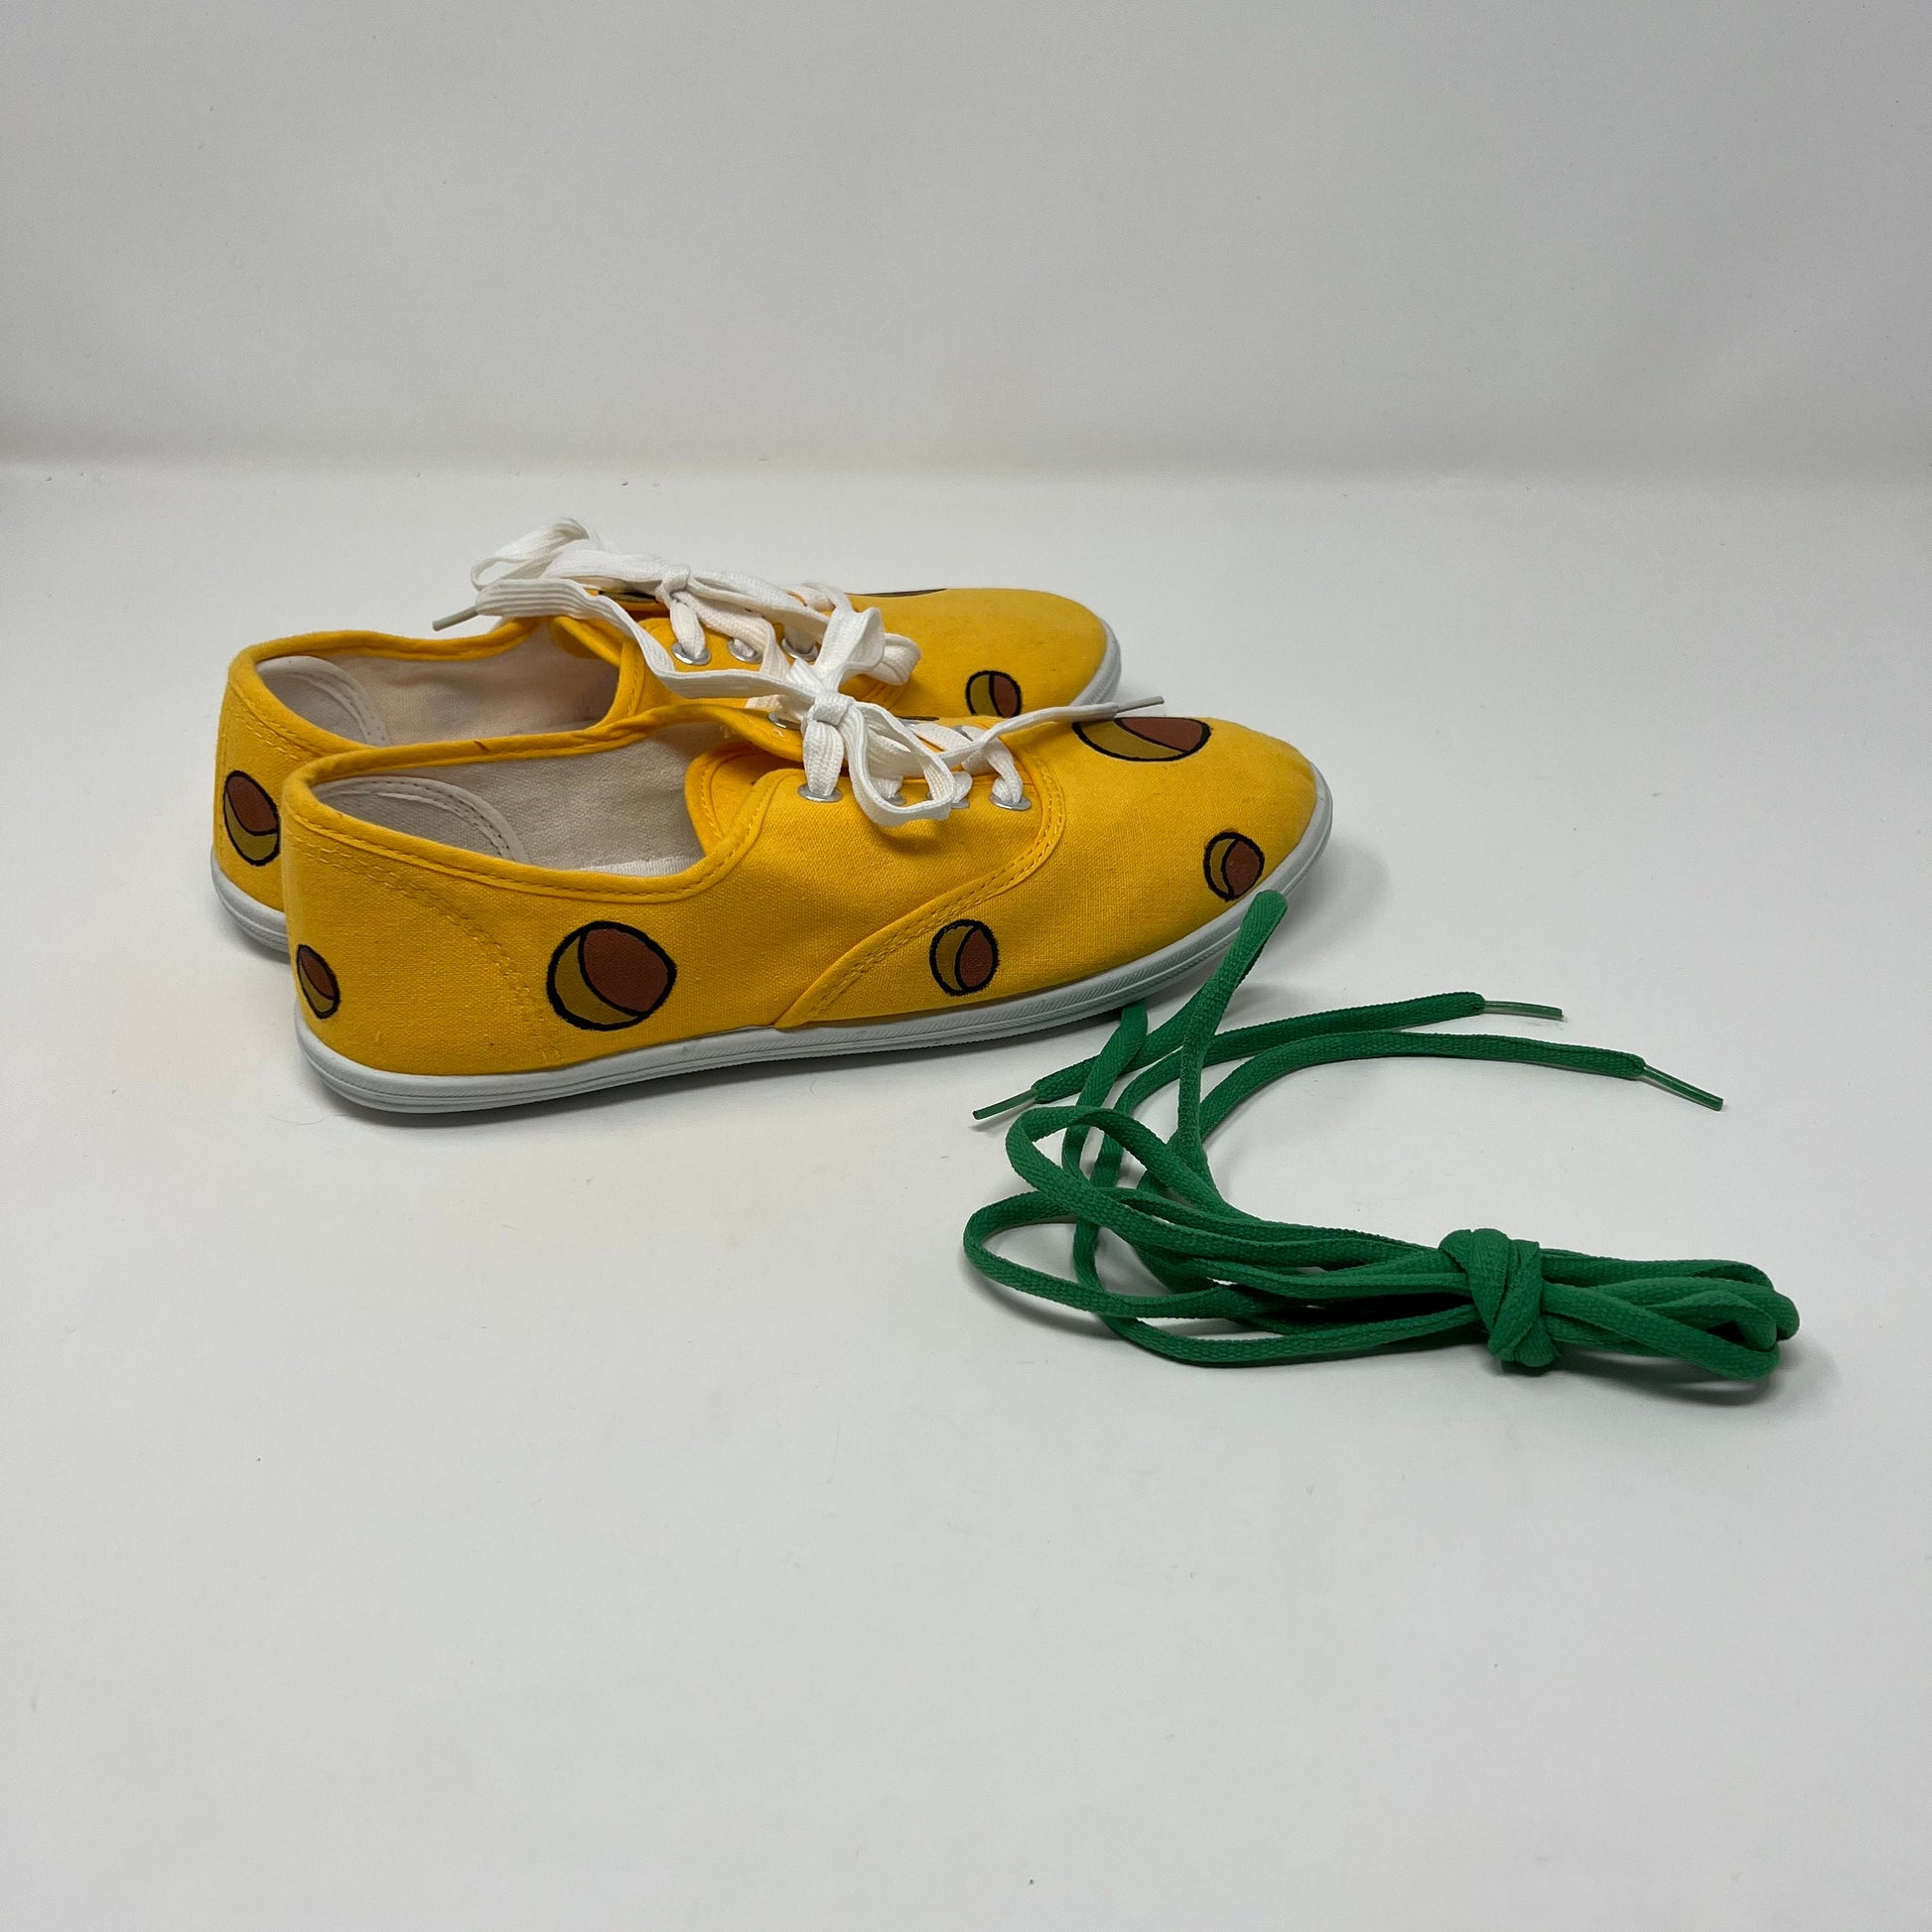 Cheese Hole Shoes [READY TO SHIP]-Misc-ButterMakesMeHappy